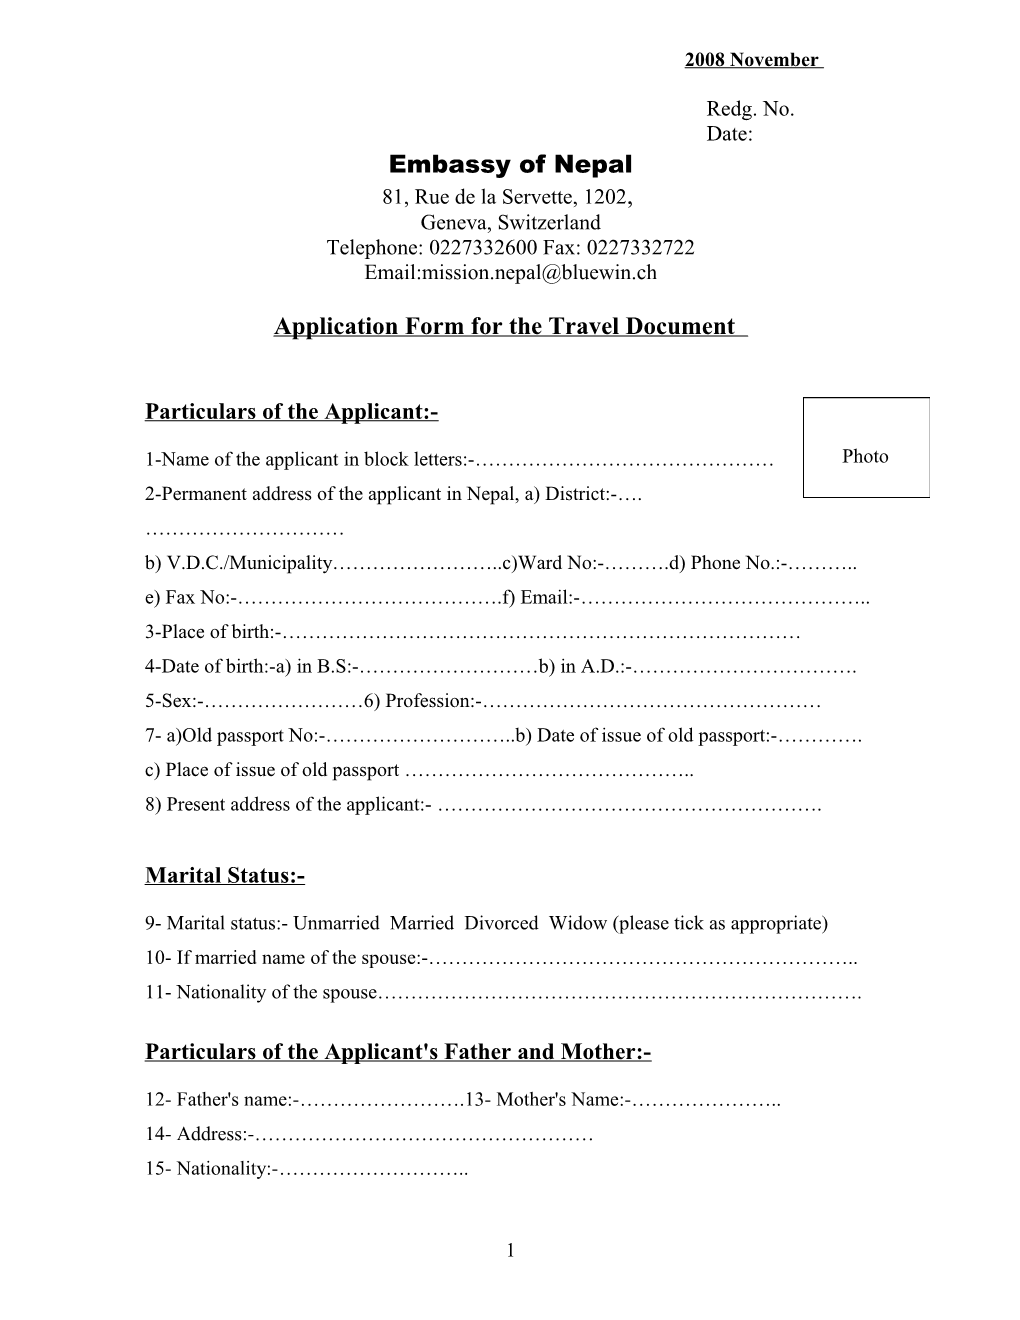 Application Form for the Travel Document